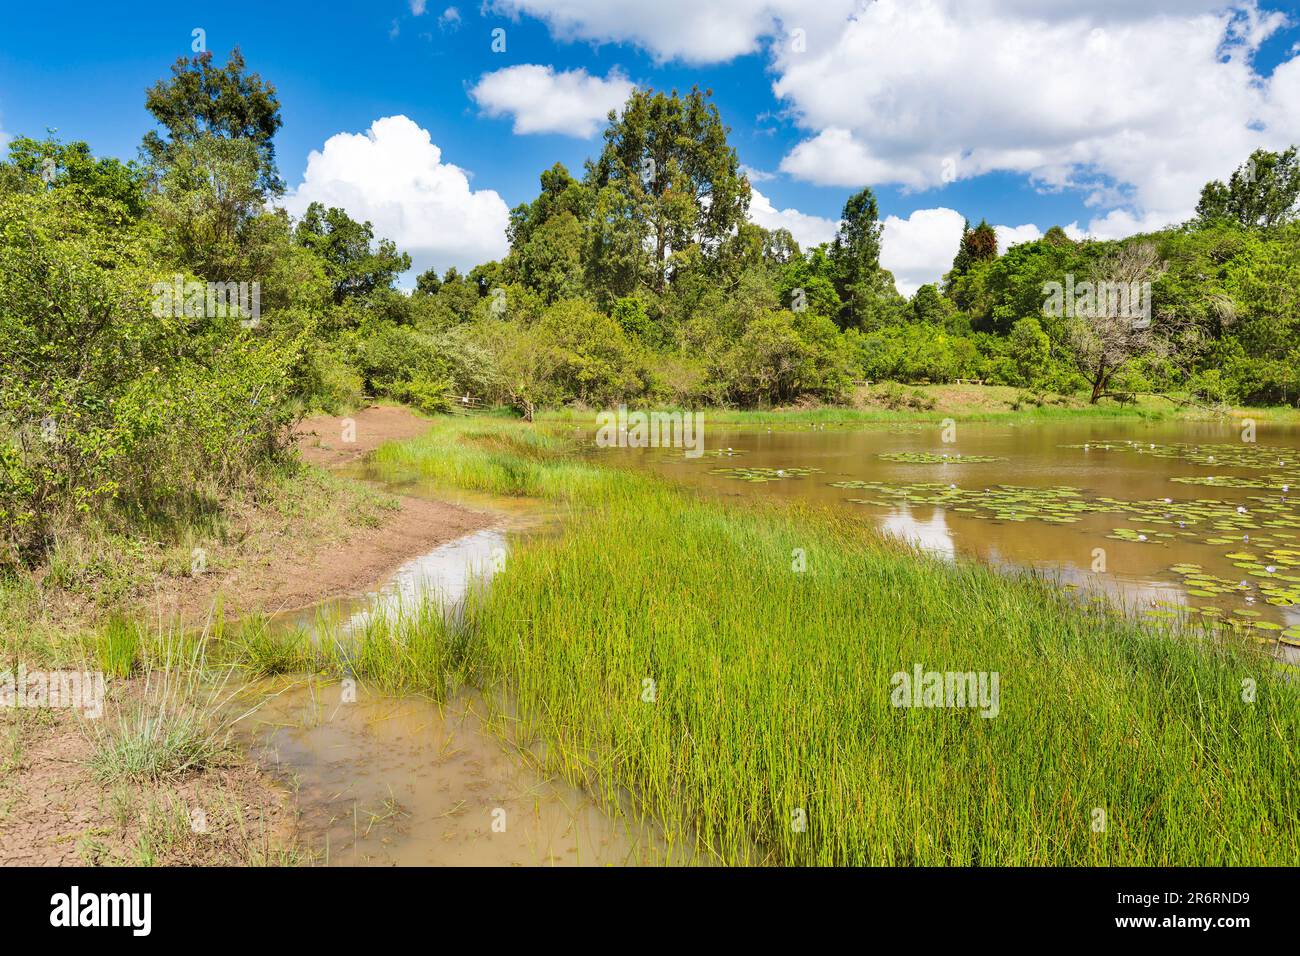 The beautiful Lily Lake in Karura Forest, Nairobi, Kenya with blue sky. Stock Photo